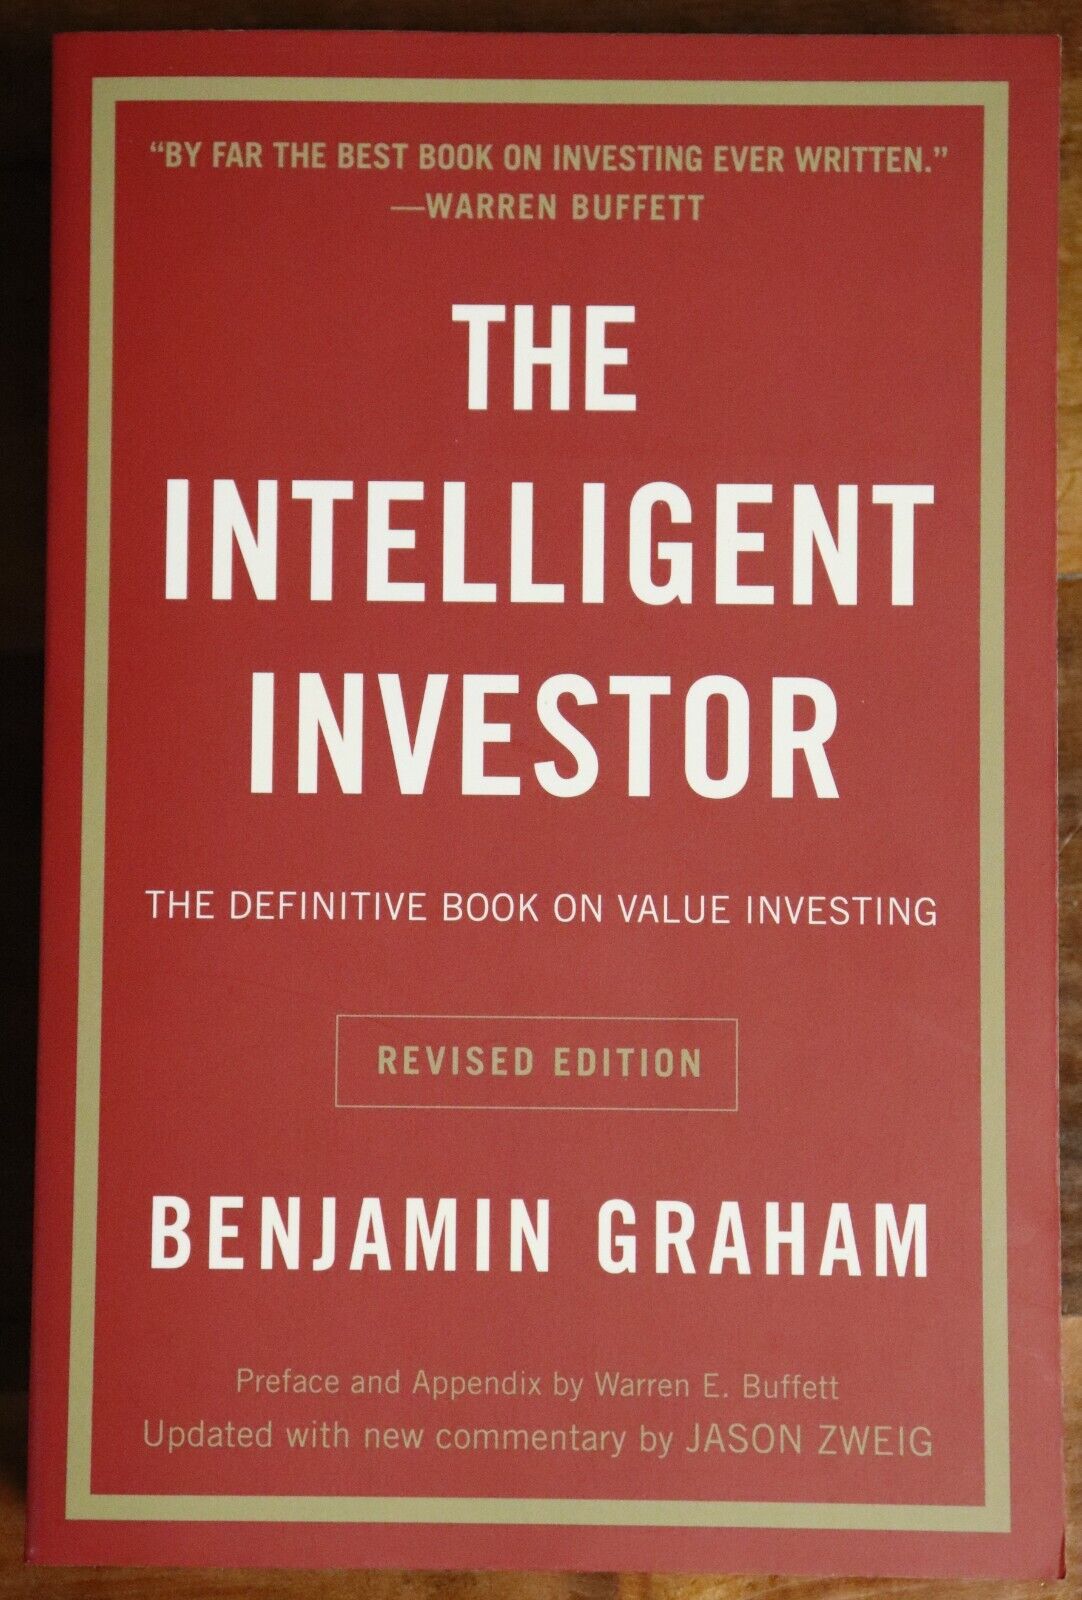 The Intelligent Investor by Benjamin Graham - 2003 - Financial Investing Book